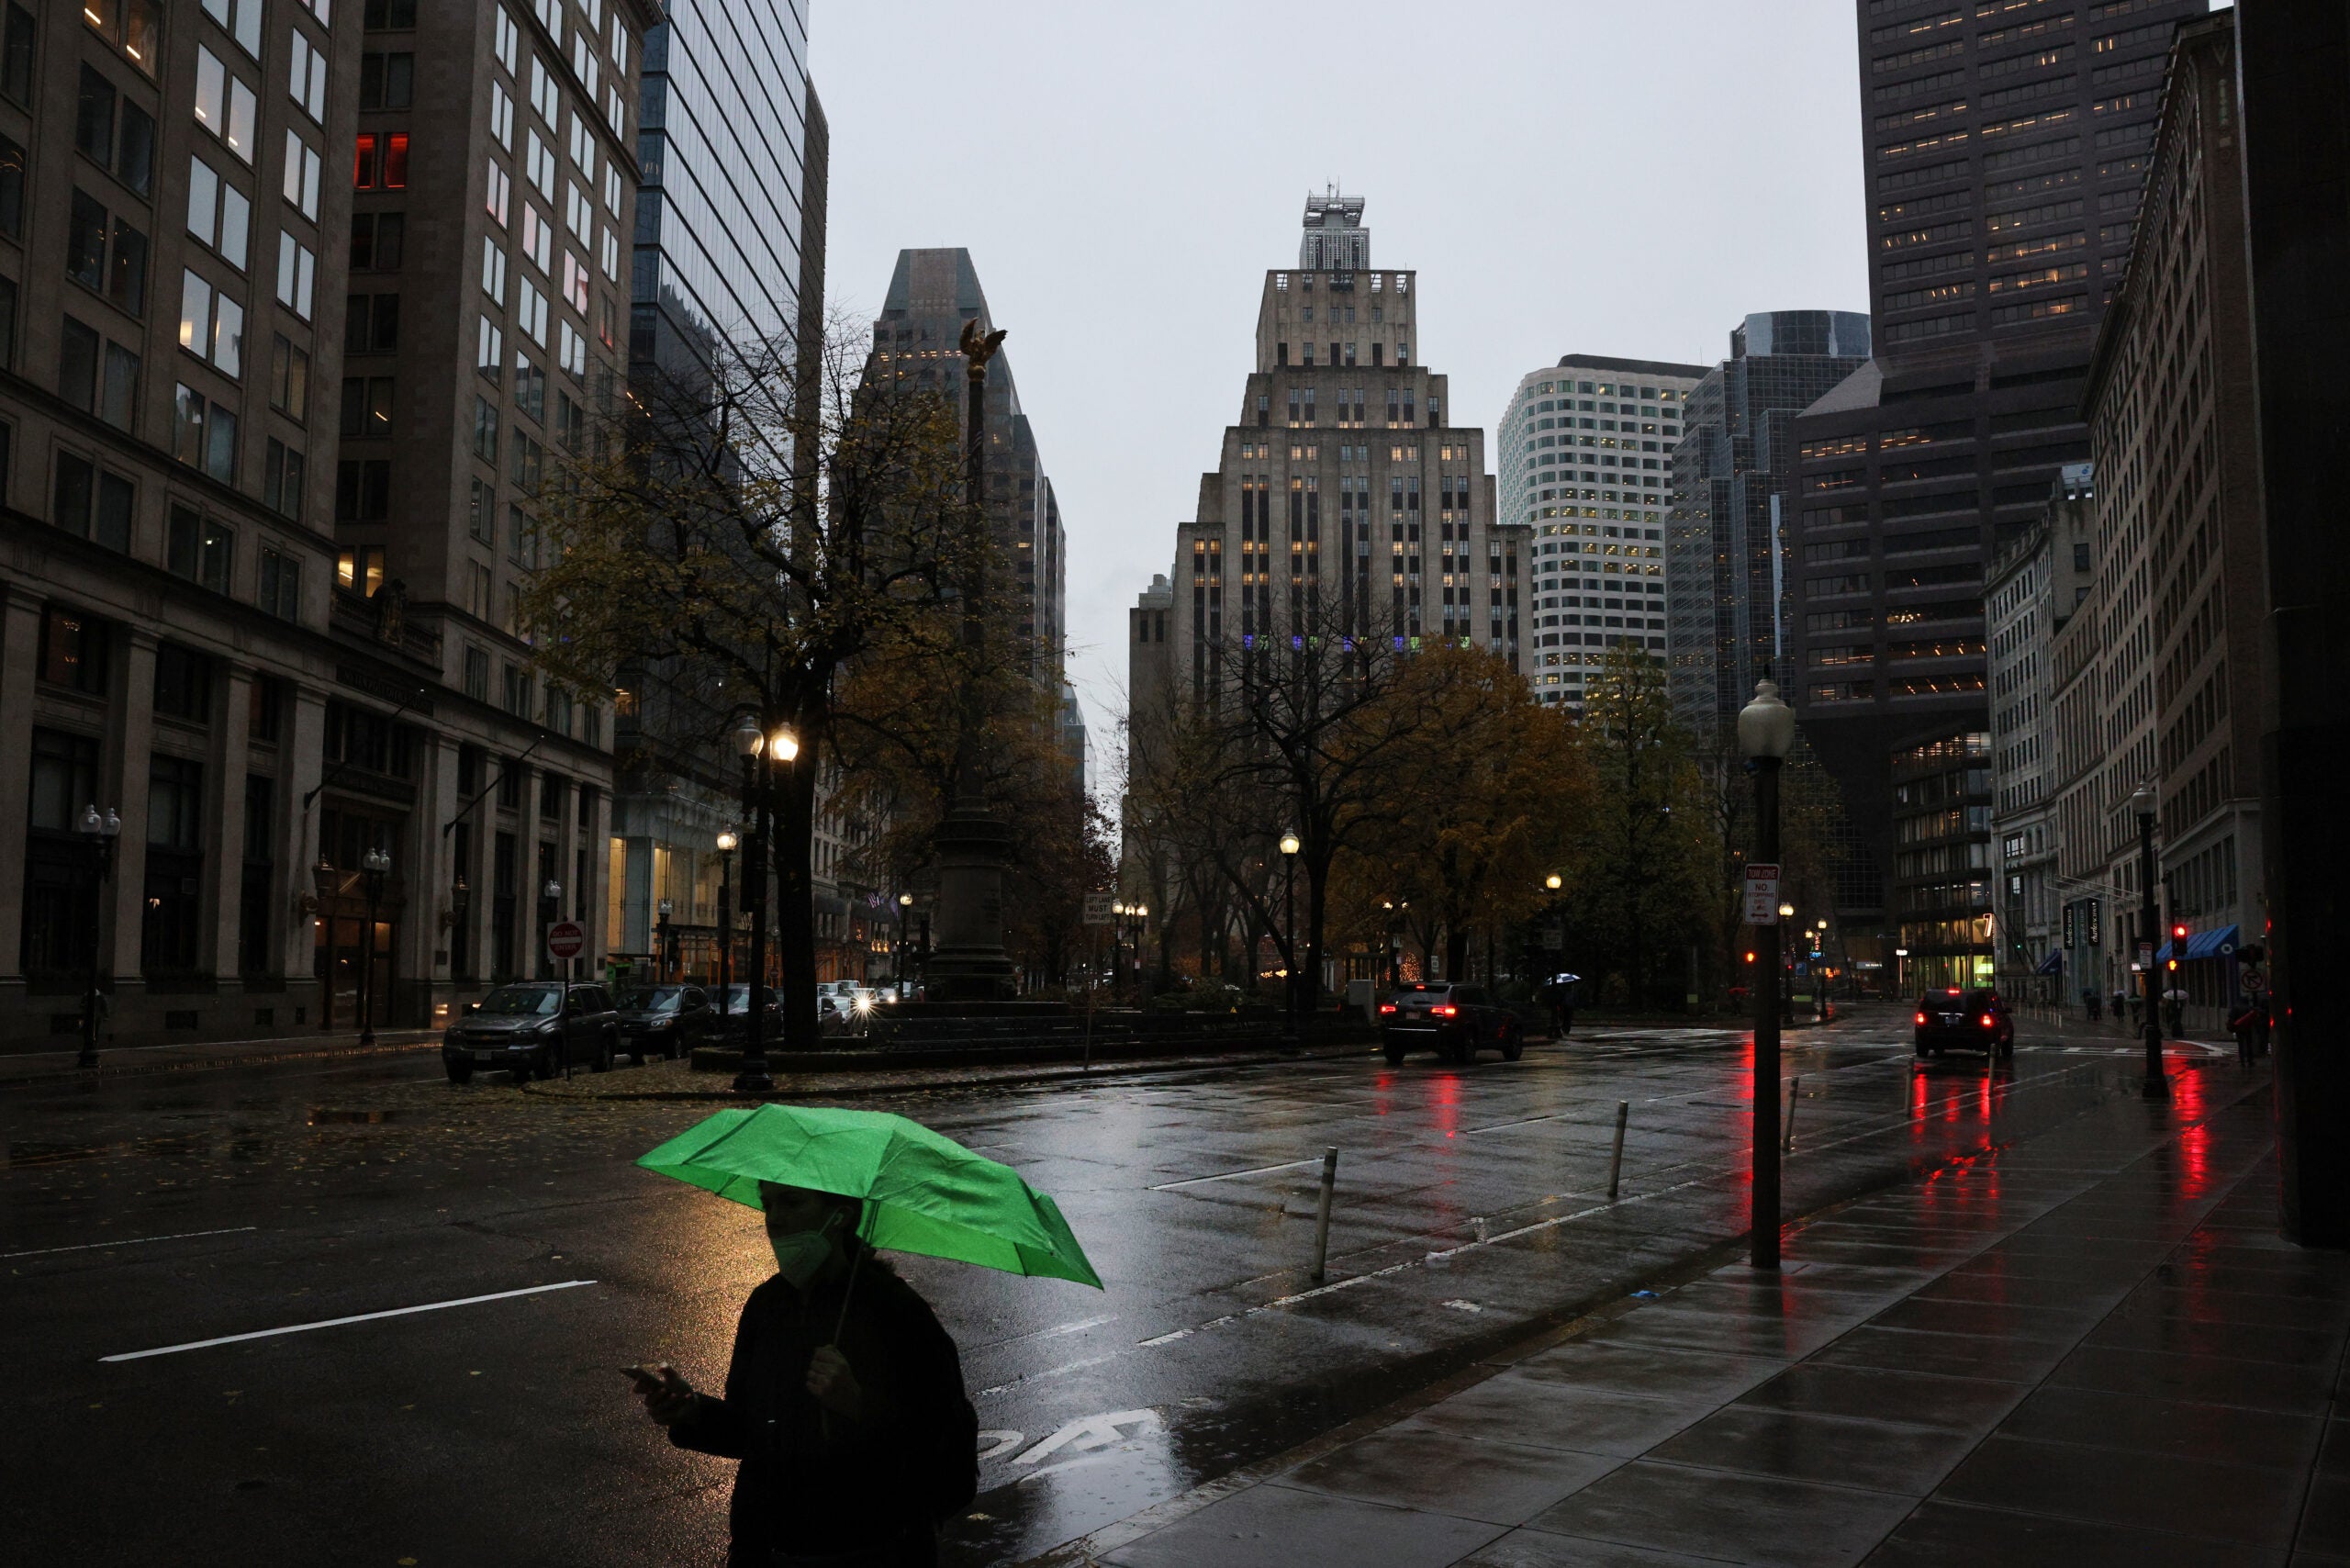 A pedestrian protects himself from rain in Post Office Square in Boston.